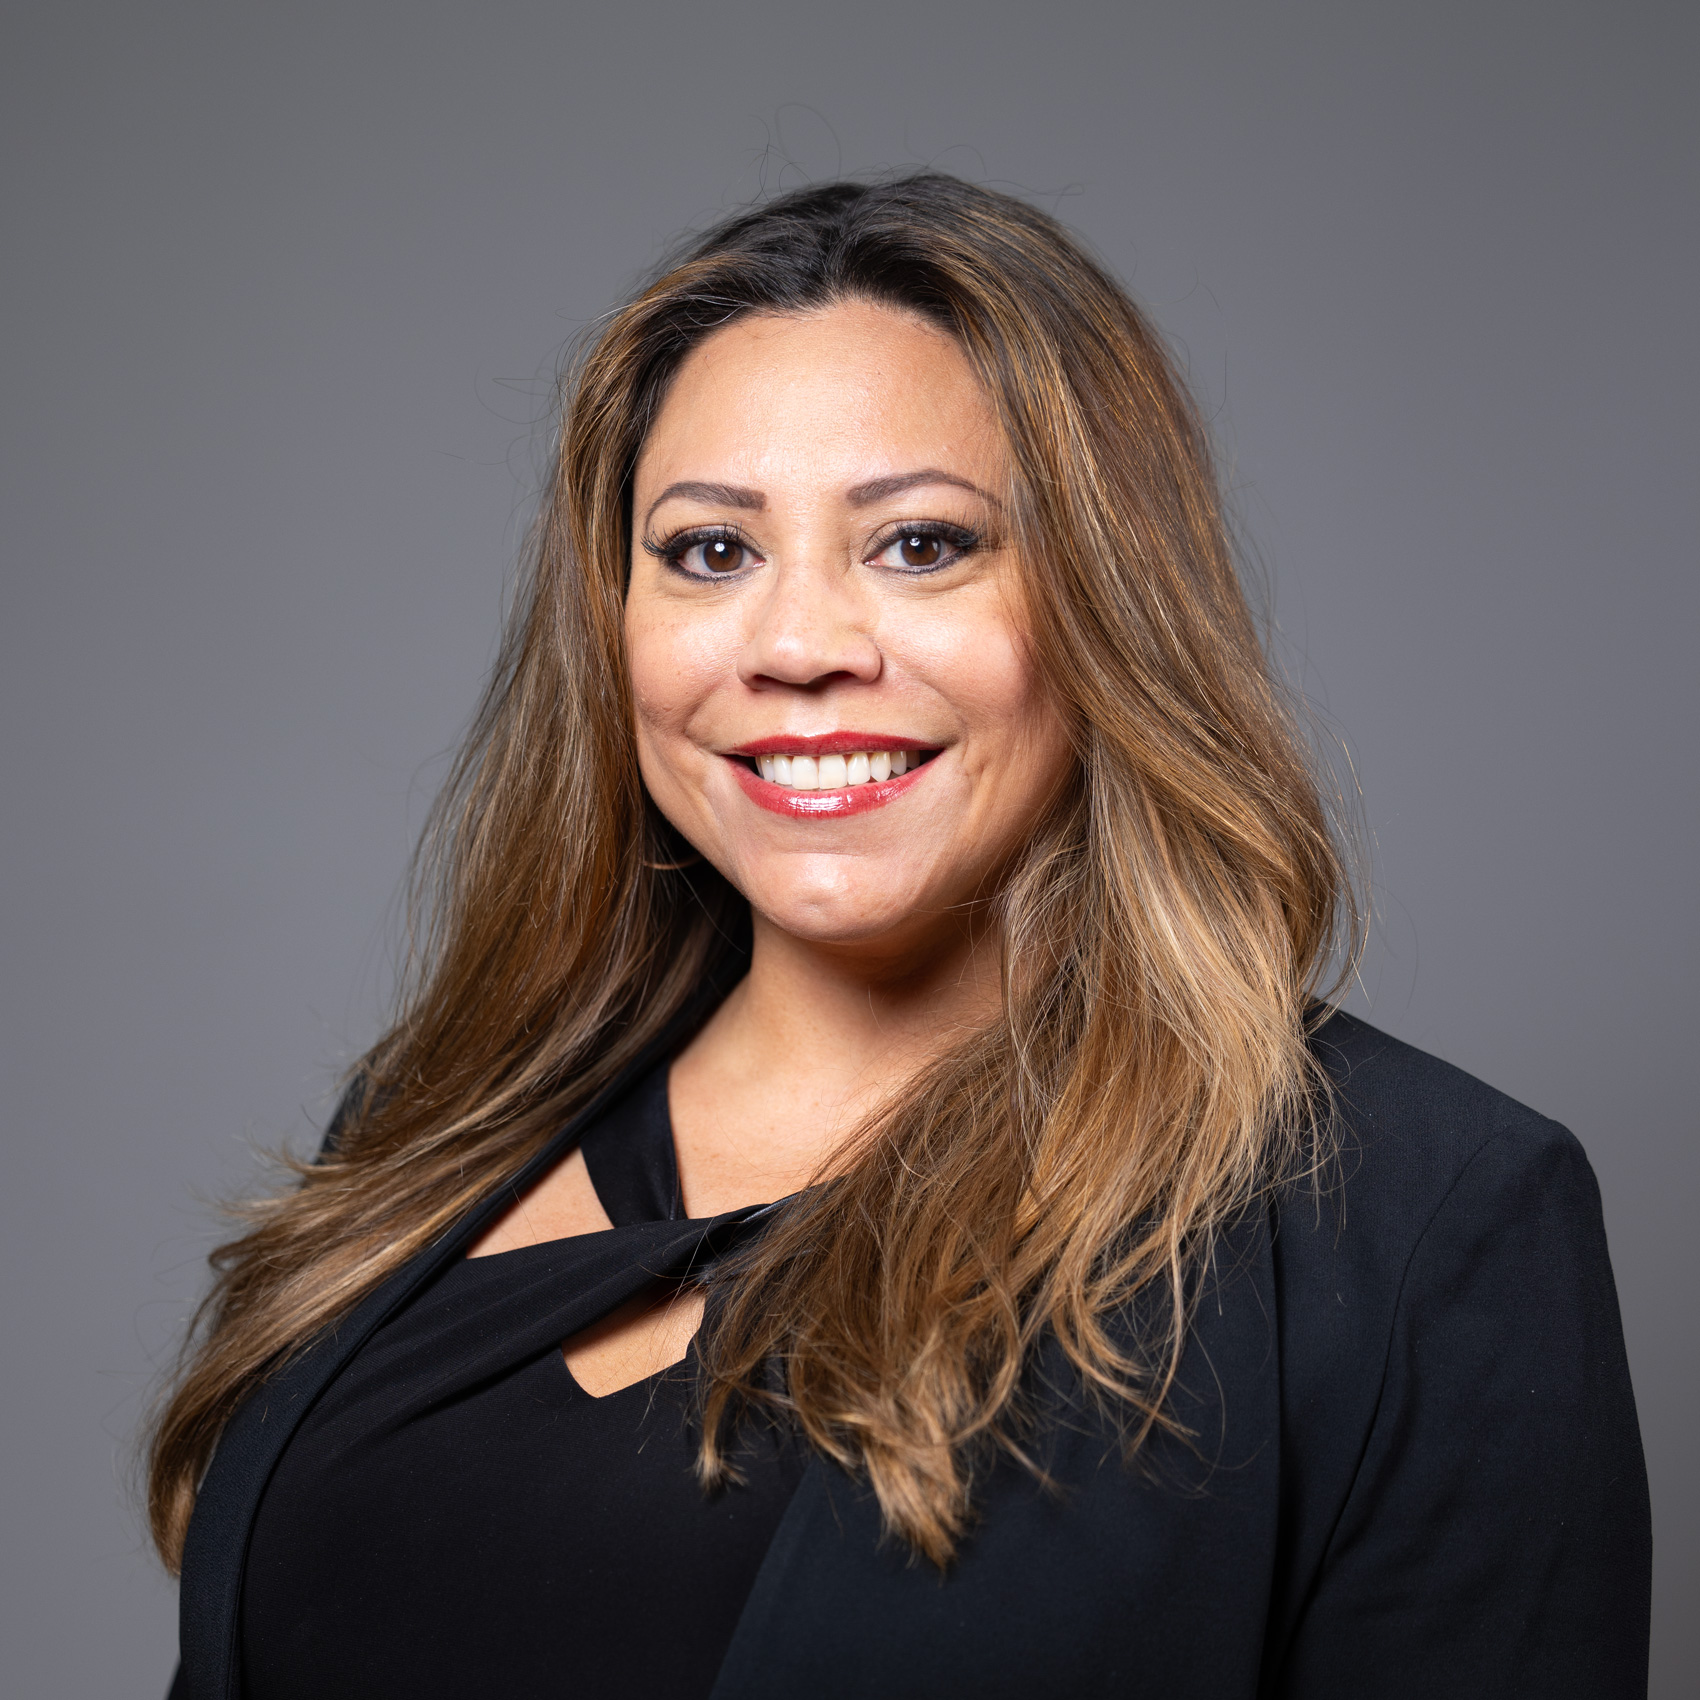 Headshot of Giselle Rodriguez Greenwood, lead editor at the Abdelraoufsinno